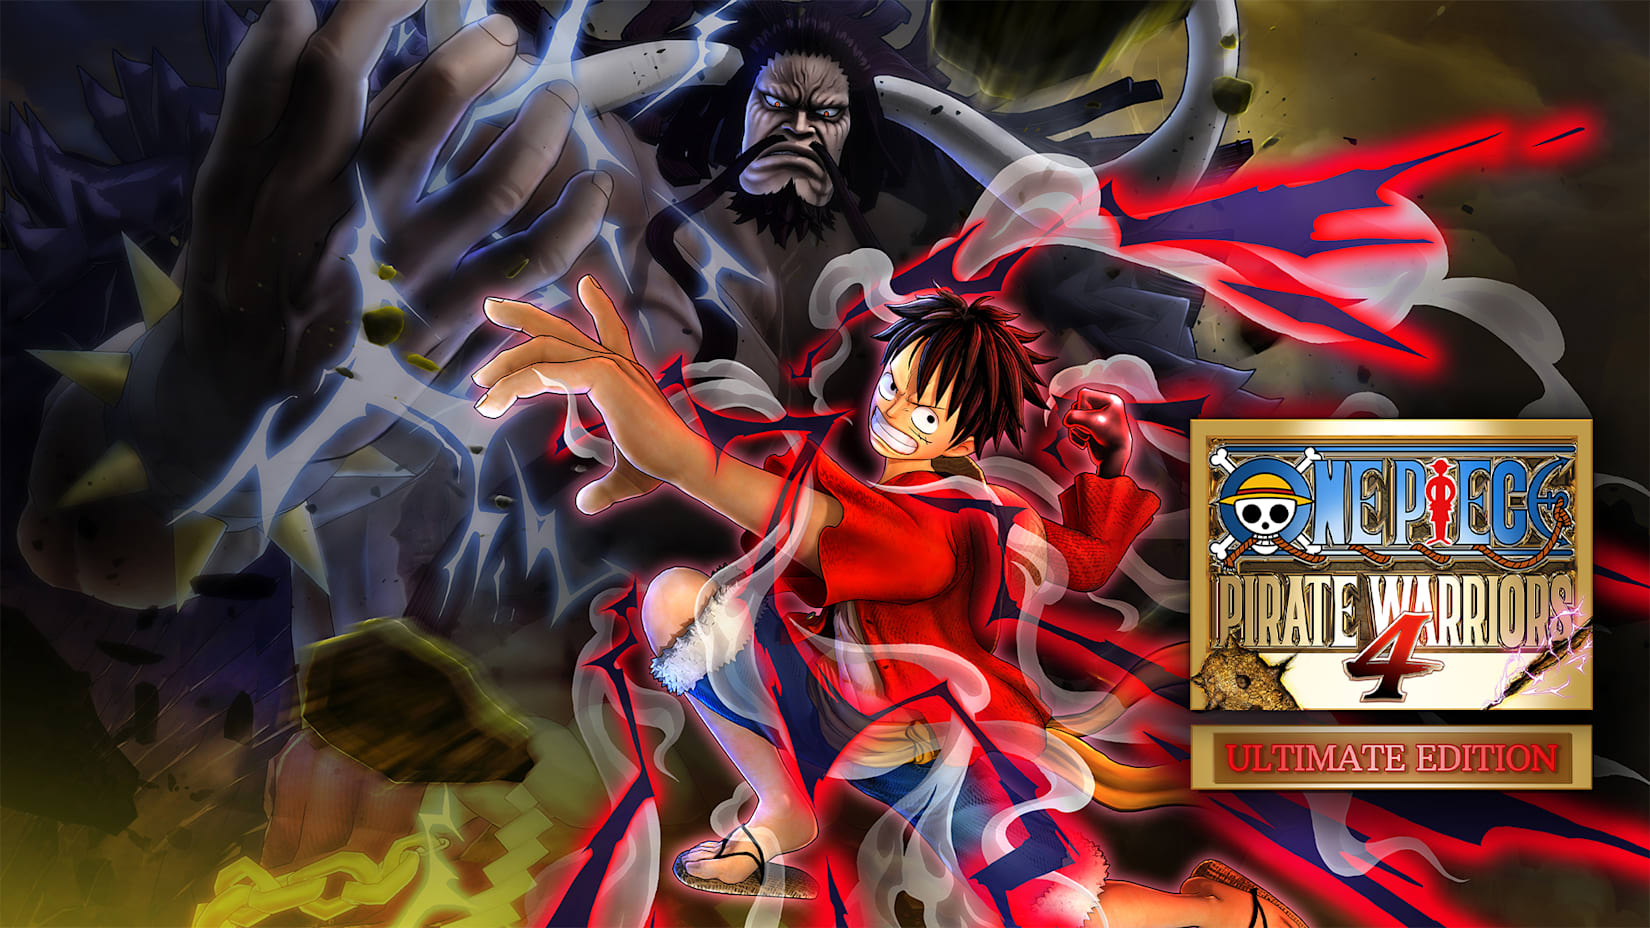 ONE PIECE: PIRATE WARRIORS 4 Digital Ultimate Edition Product Image